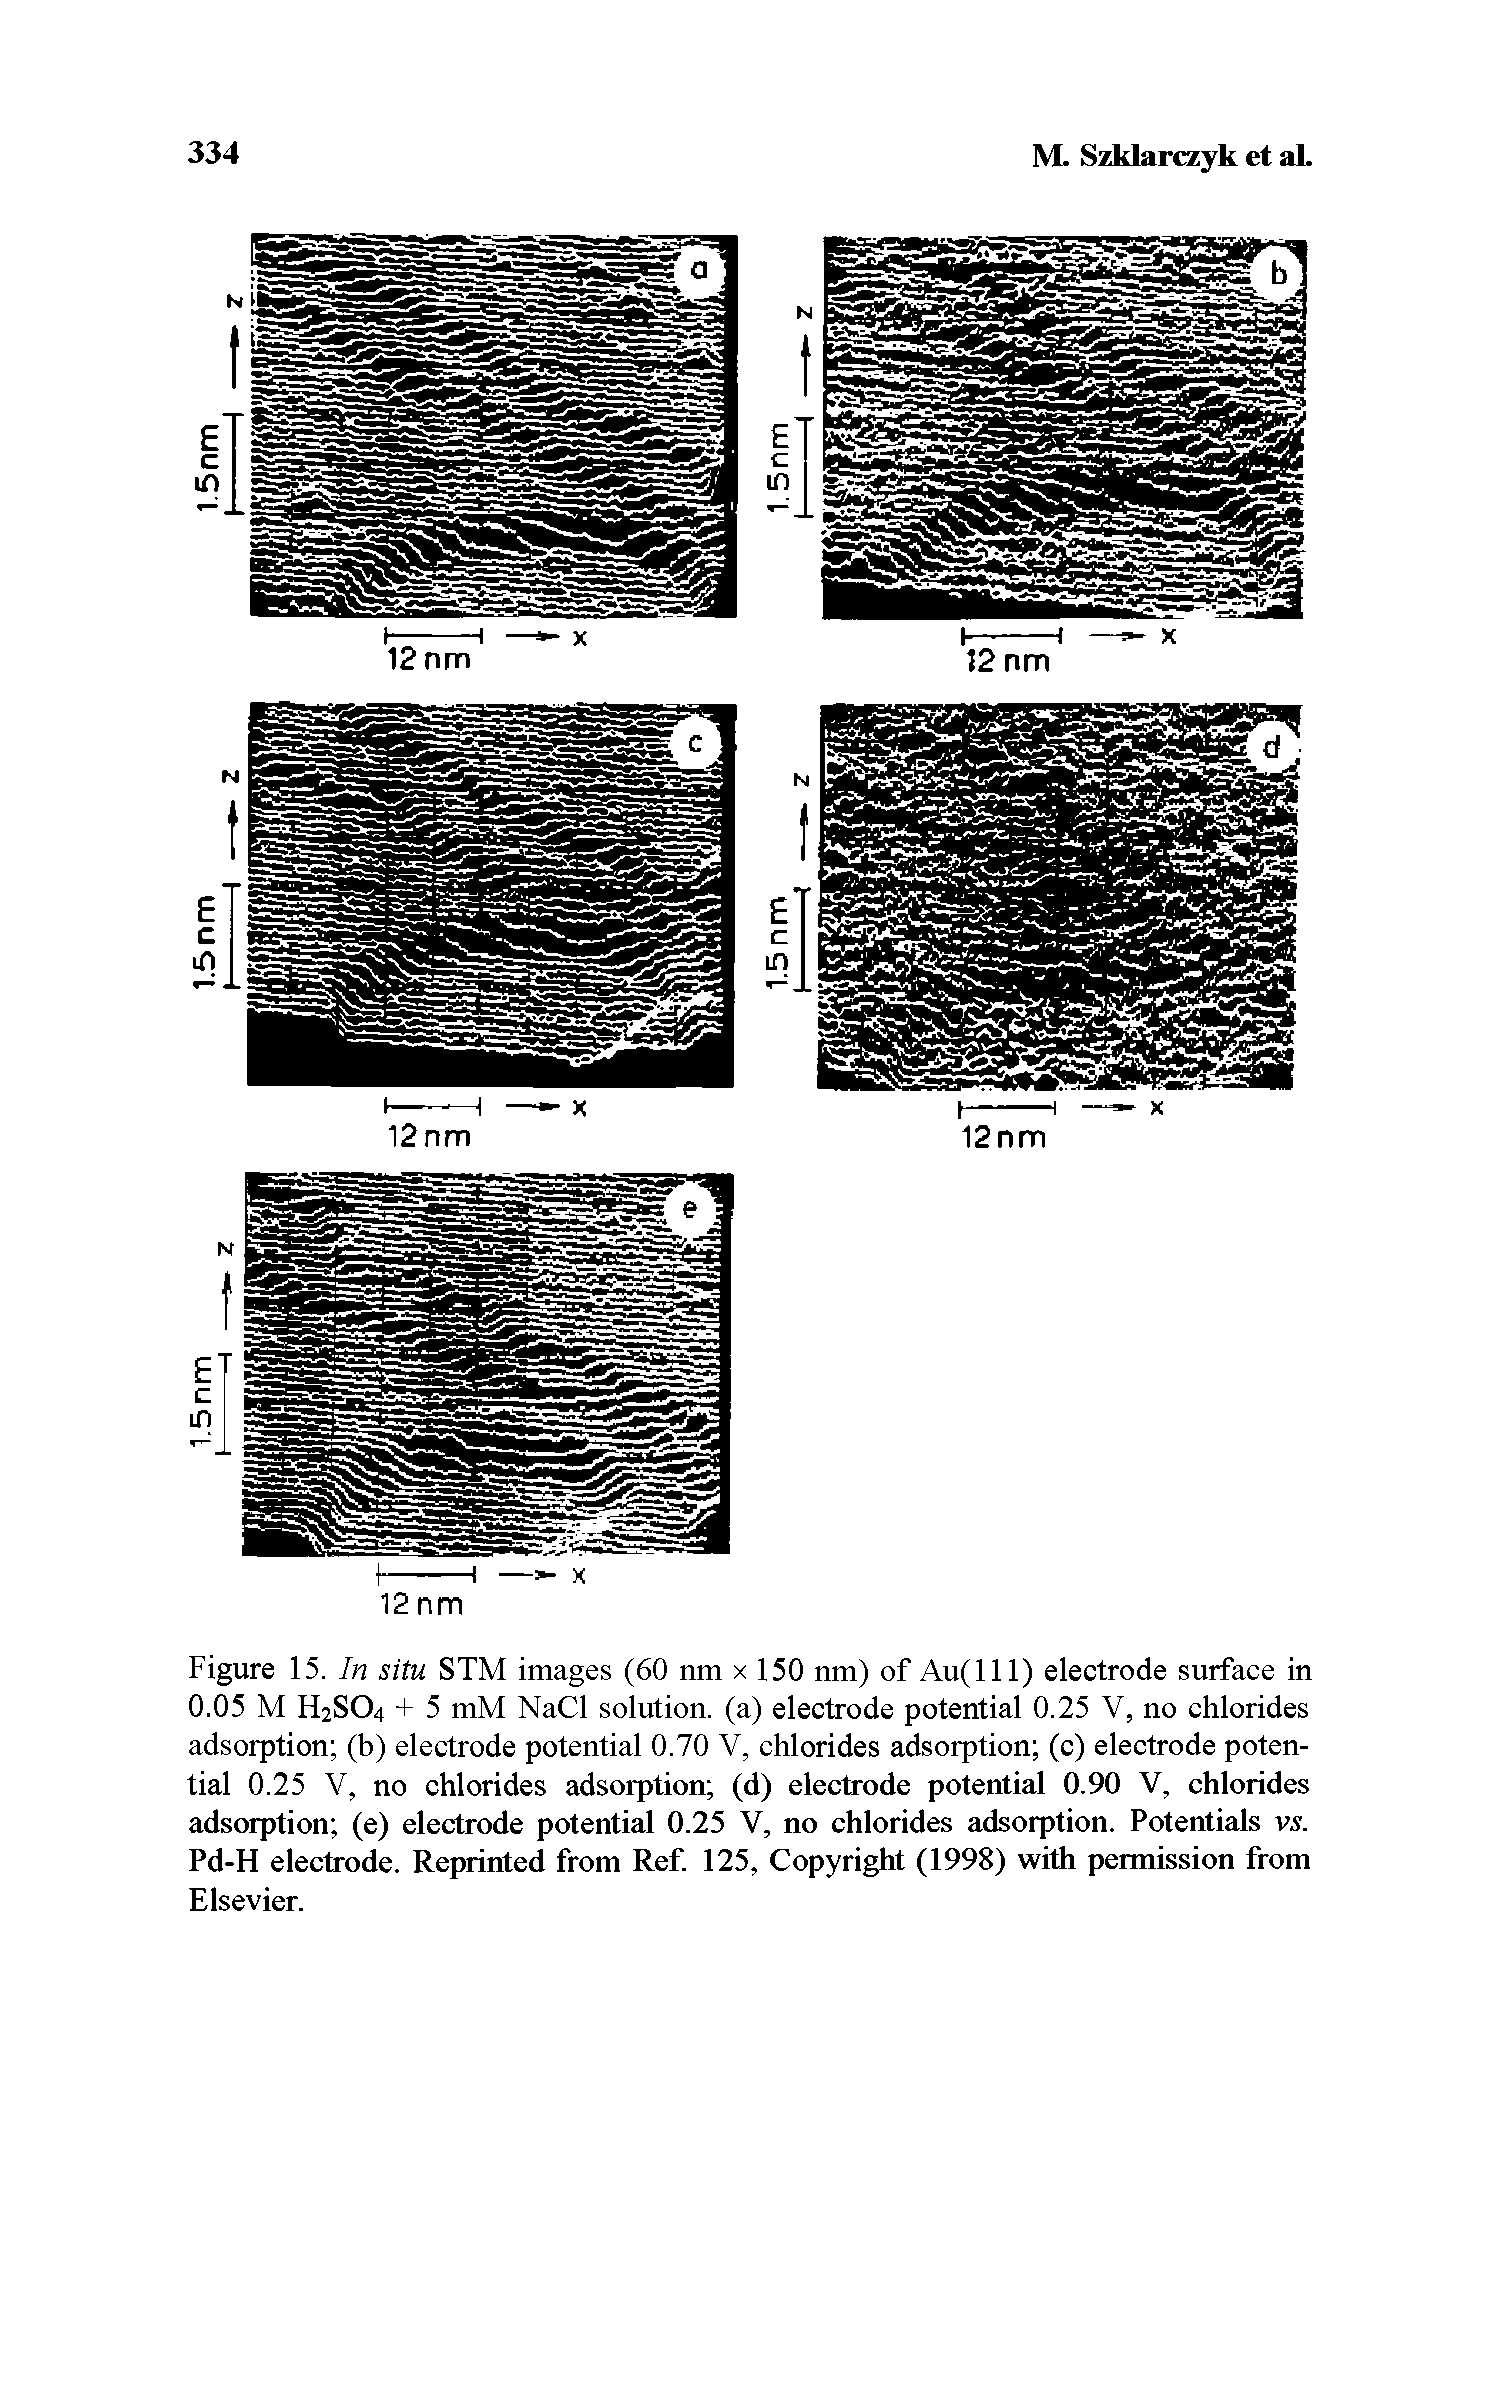 Figure 15. In situ STM images (60 nm x 150 nm) of Au(lll) electrode surface in 0.05 M H2SO4 + 5 mM NaCl solution, (a) electrode potential 0.25 V, no chlorides adsorption (b) electrode potential 0.70 V, chlorides adsorption (c) electrode potential 0.25 V, no chlorides adsorption (d) electrode potential 0.90 V, chlorides adsorption (e) electrode potential 0.25 V, no chlorides adsorption. Potentials v.v. Pd-H electrode. Reprinted from Ref. 125, Copyright (1998) with permission from Elsevier.